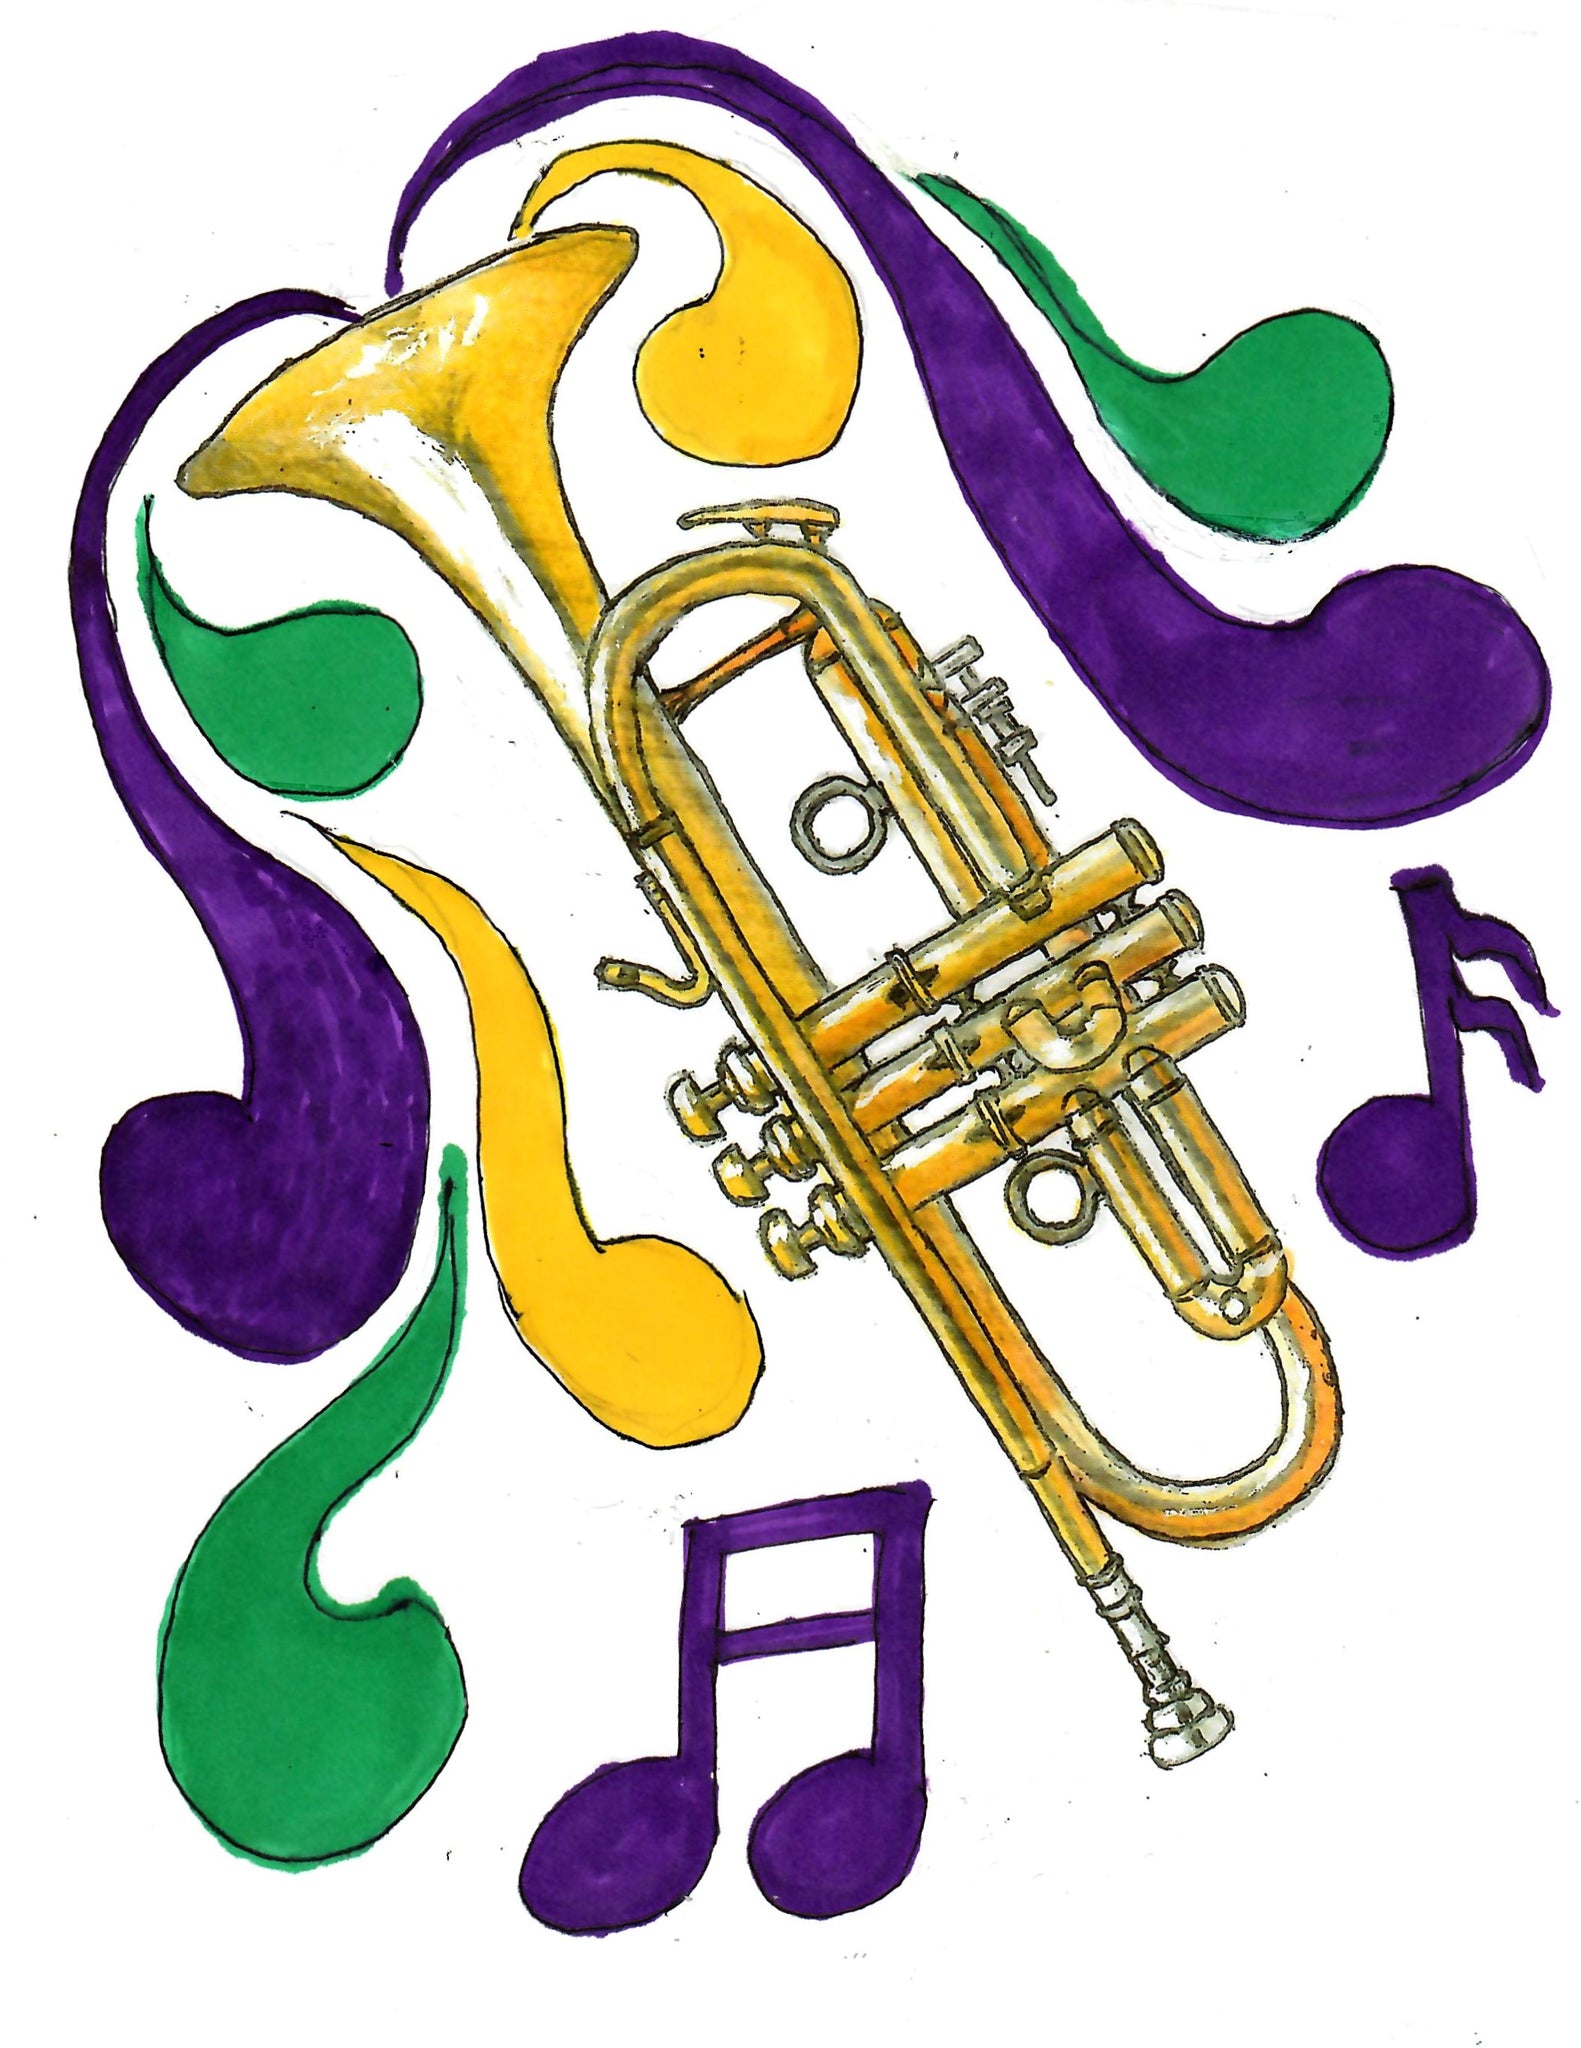 MUSICIANS - TRUMPET PLAYING MARDI GRAS NOTES (PURPLE, GREEN AND YELLOW)